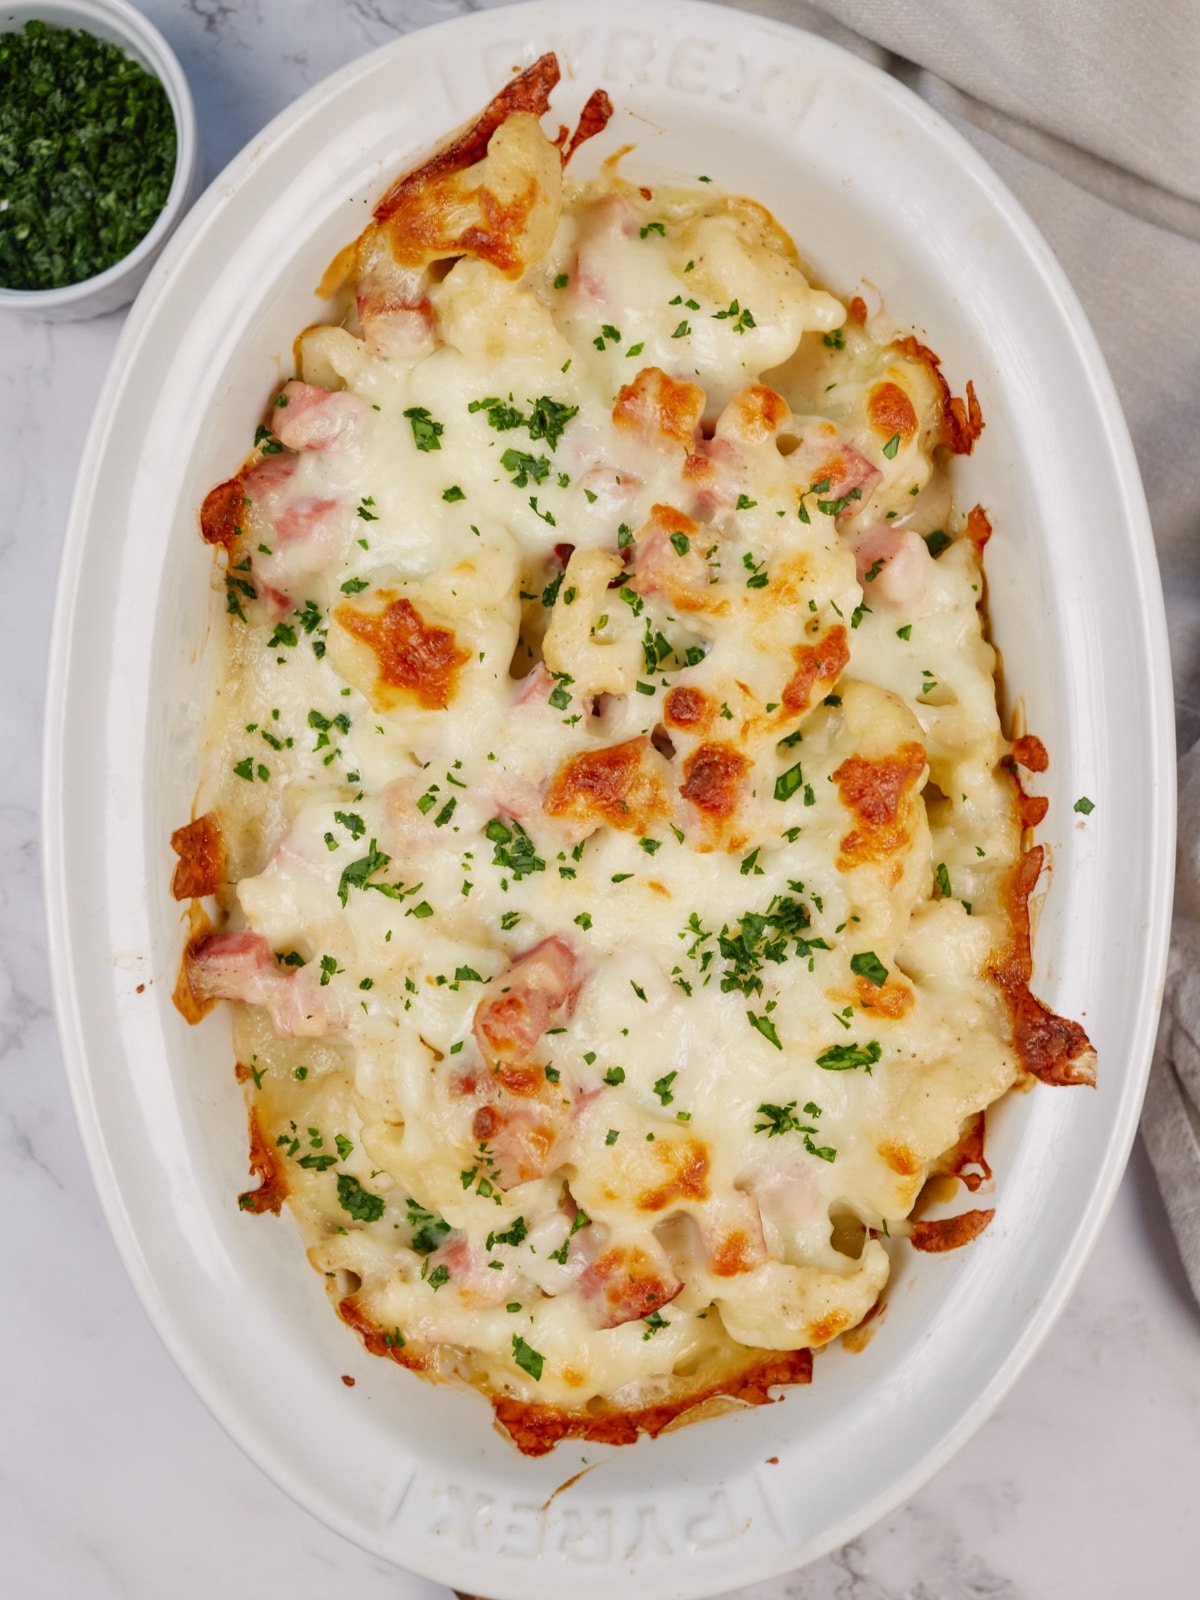 ham and cauliflower casserole out of a baking dish